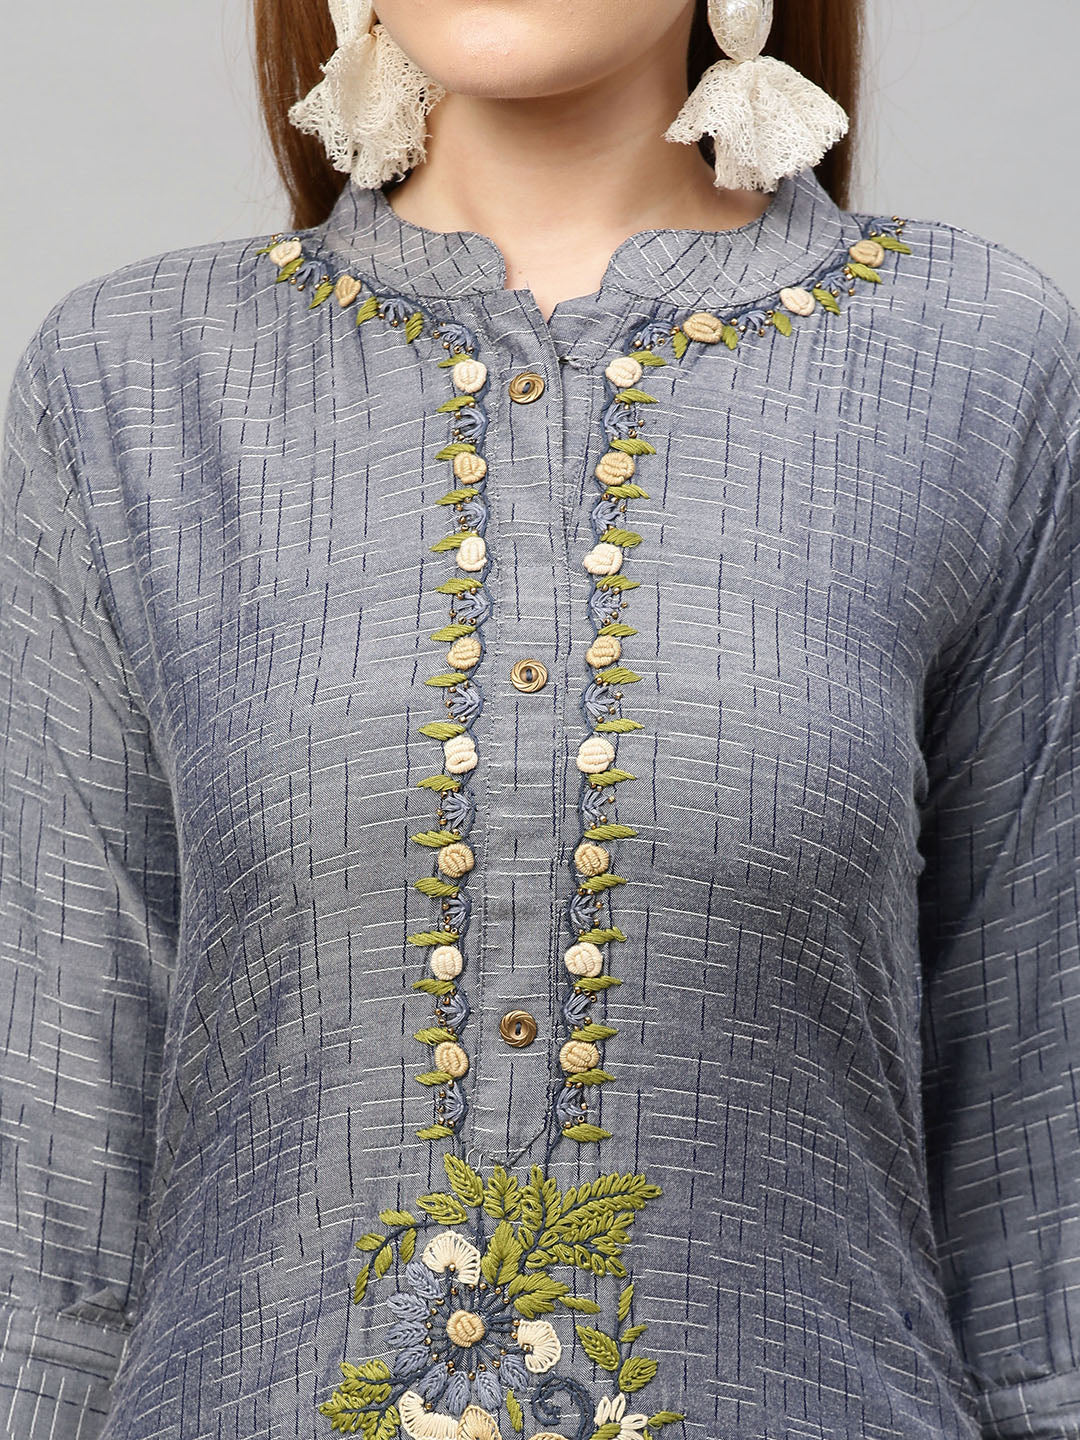 Floral Hand Embroidered & Woven Straight Kurta with Pants - Pigeon Blue